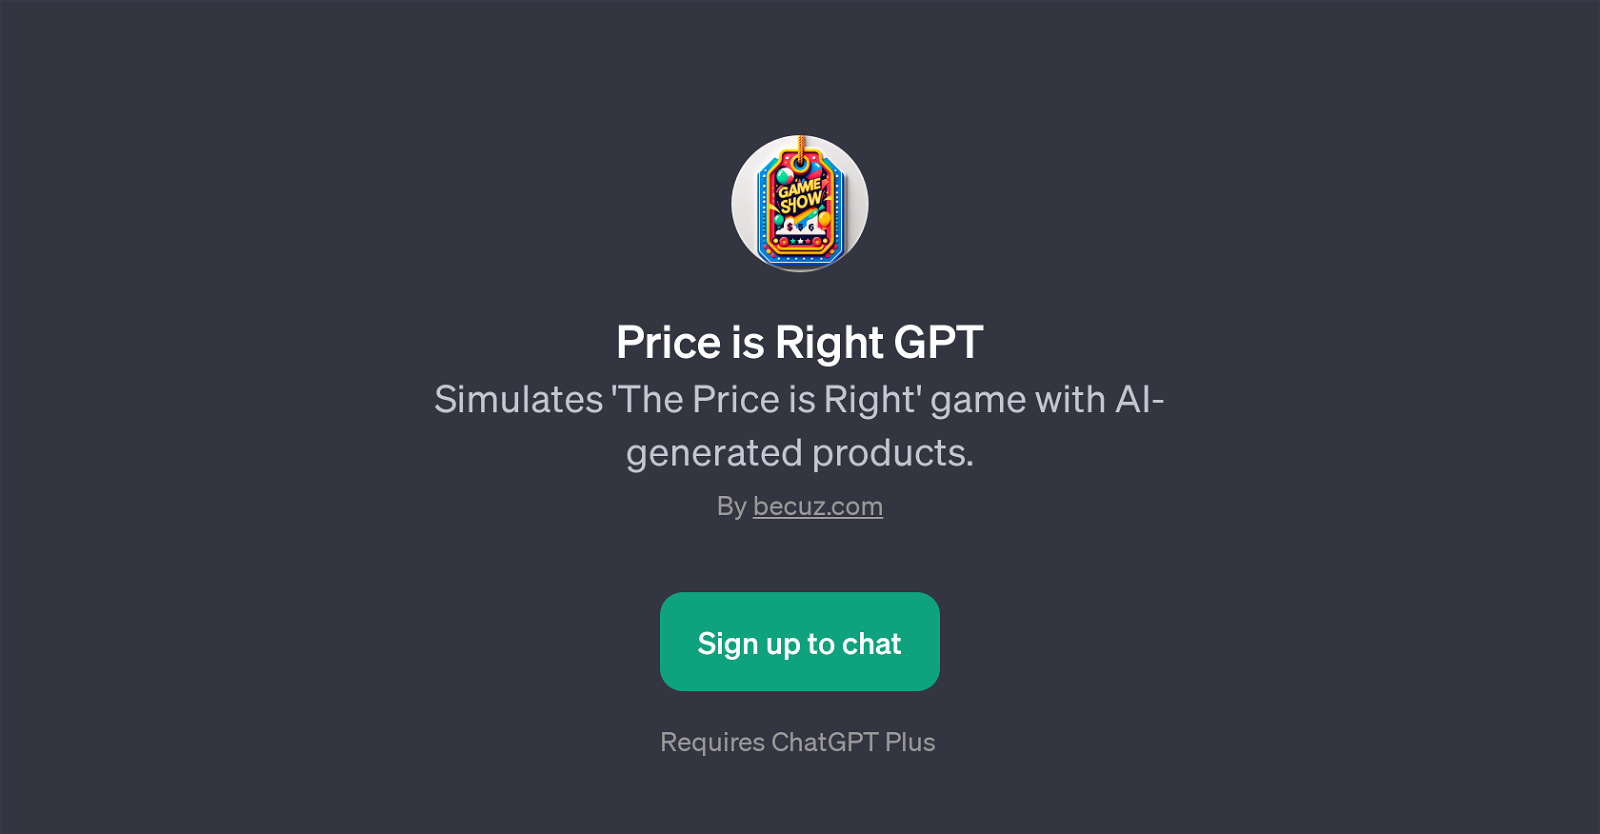 Price is Right GPT website